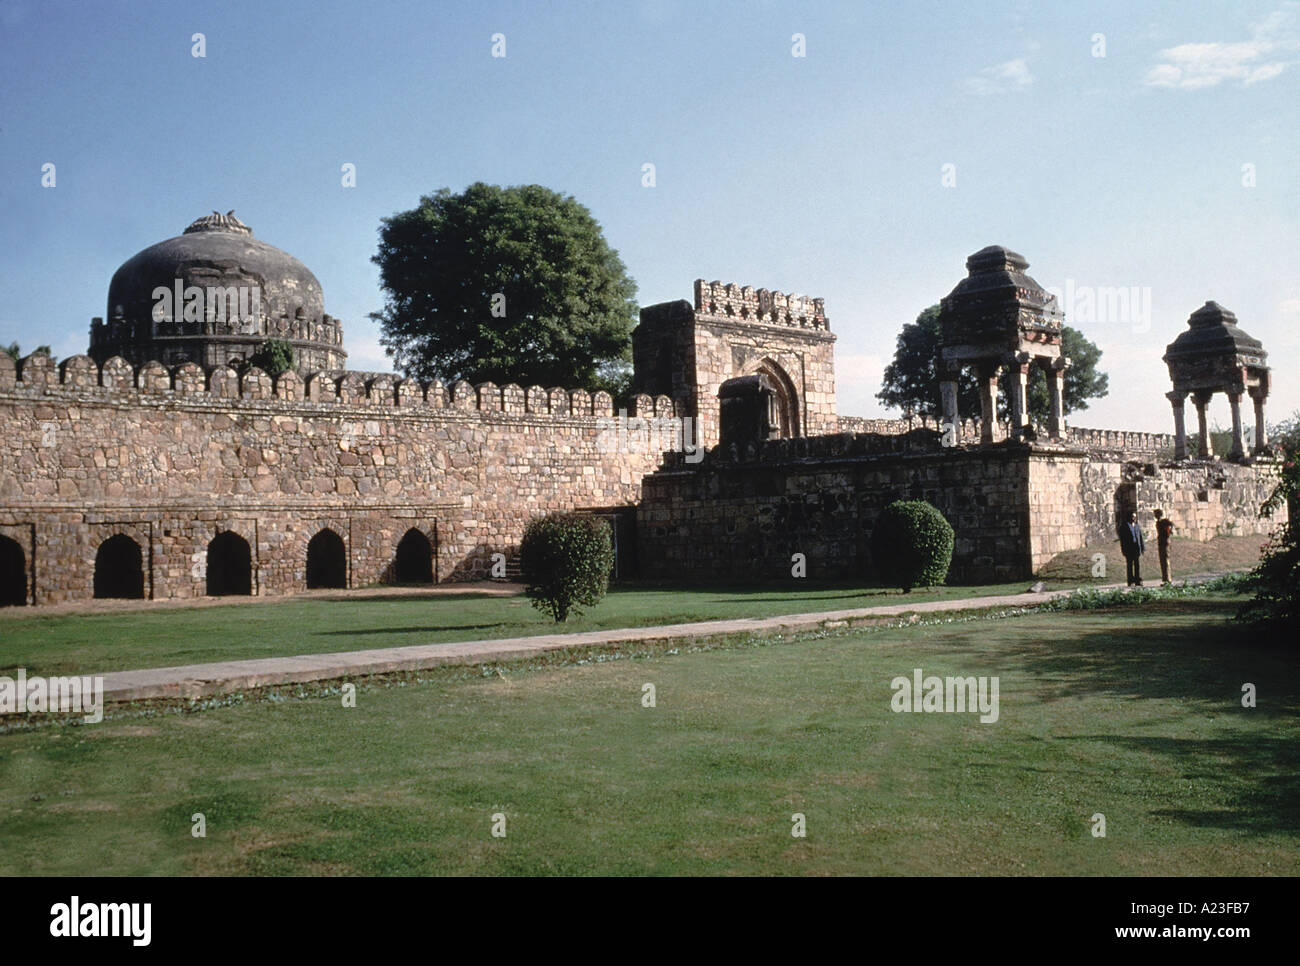 View of the east façade wall. Tomb of Sikandaer Lodi. Dated: Lodi period, 1517 A.D. Delhi, India. Stock Photo